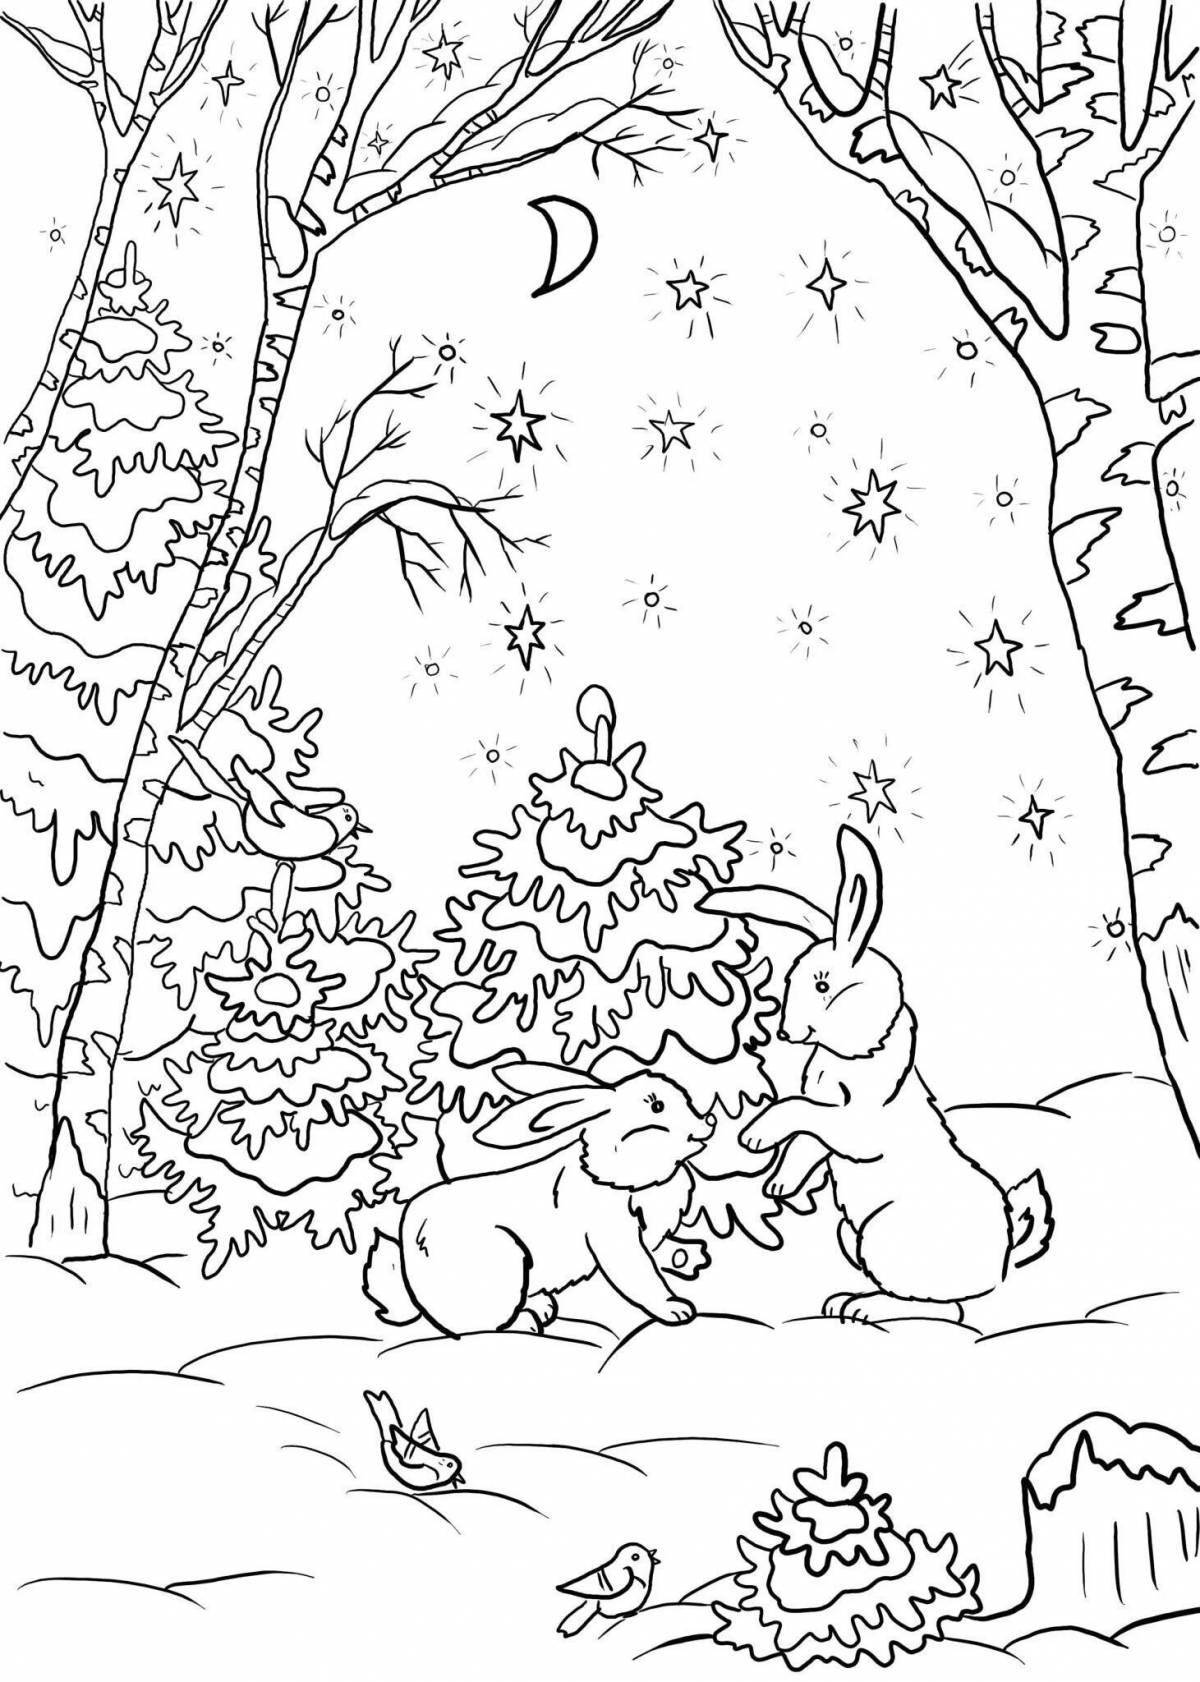 Magic winter animals coloring book for 3-4 year olds